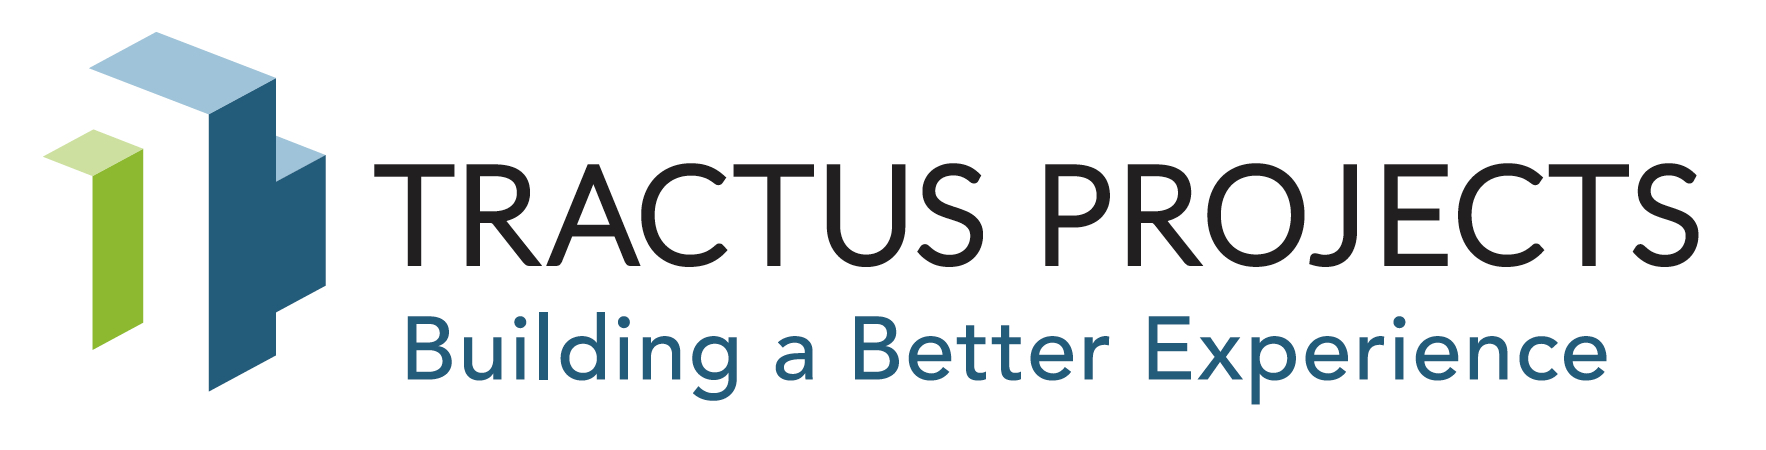 Tractus Projects